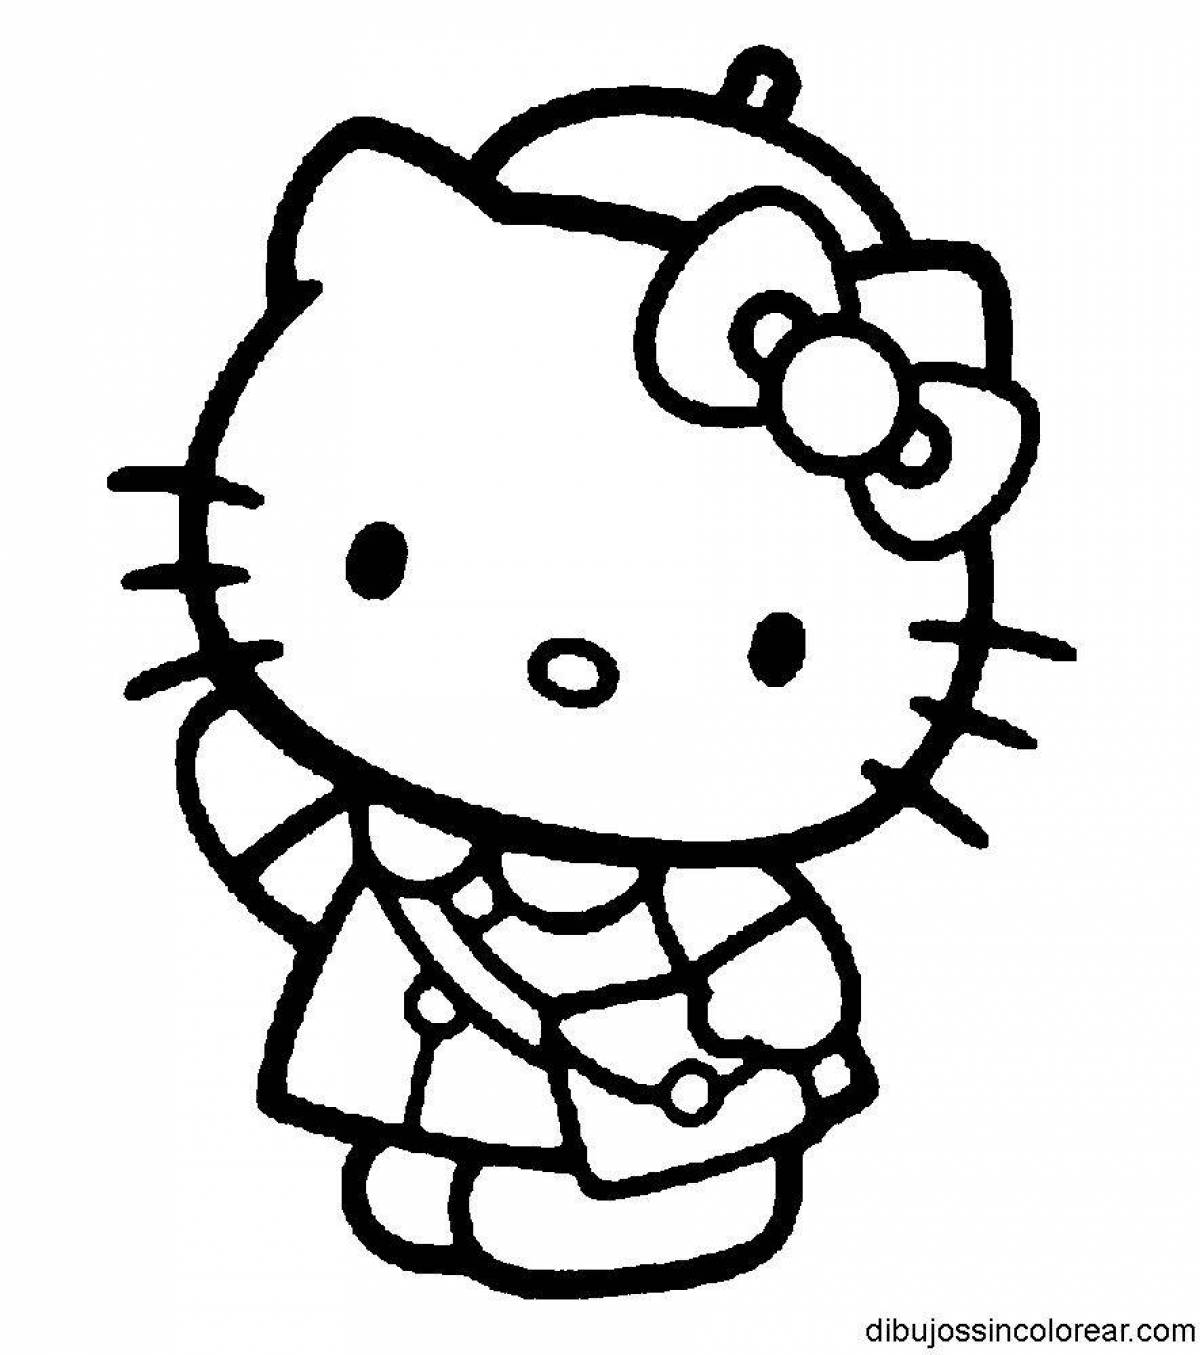 Coloring book hello kitty sparkling chickens